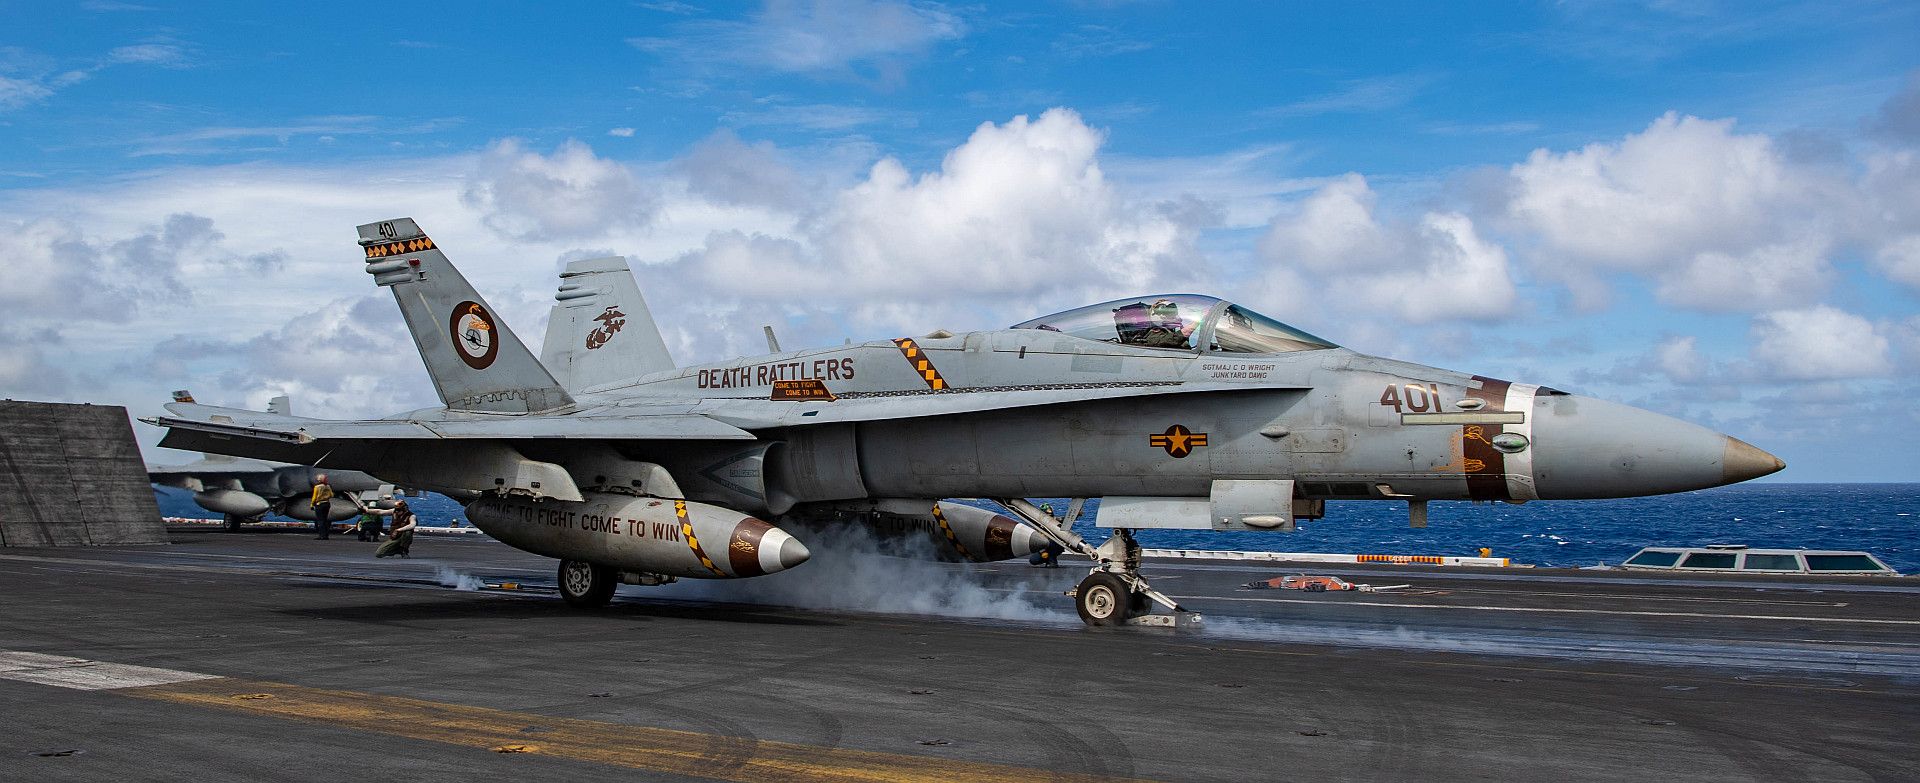  Launches Off The Flight Deck Of The USS Nimitz